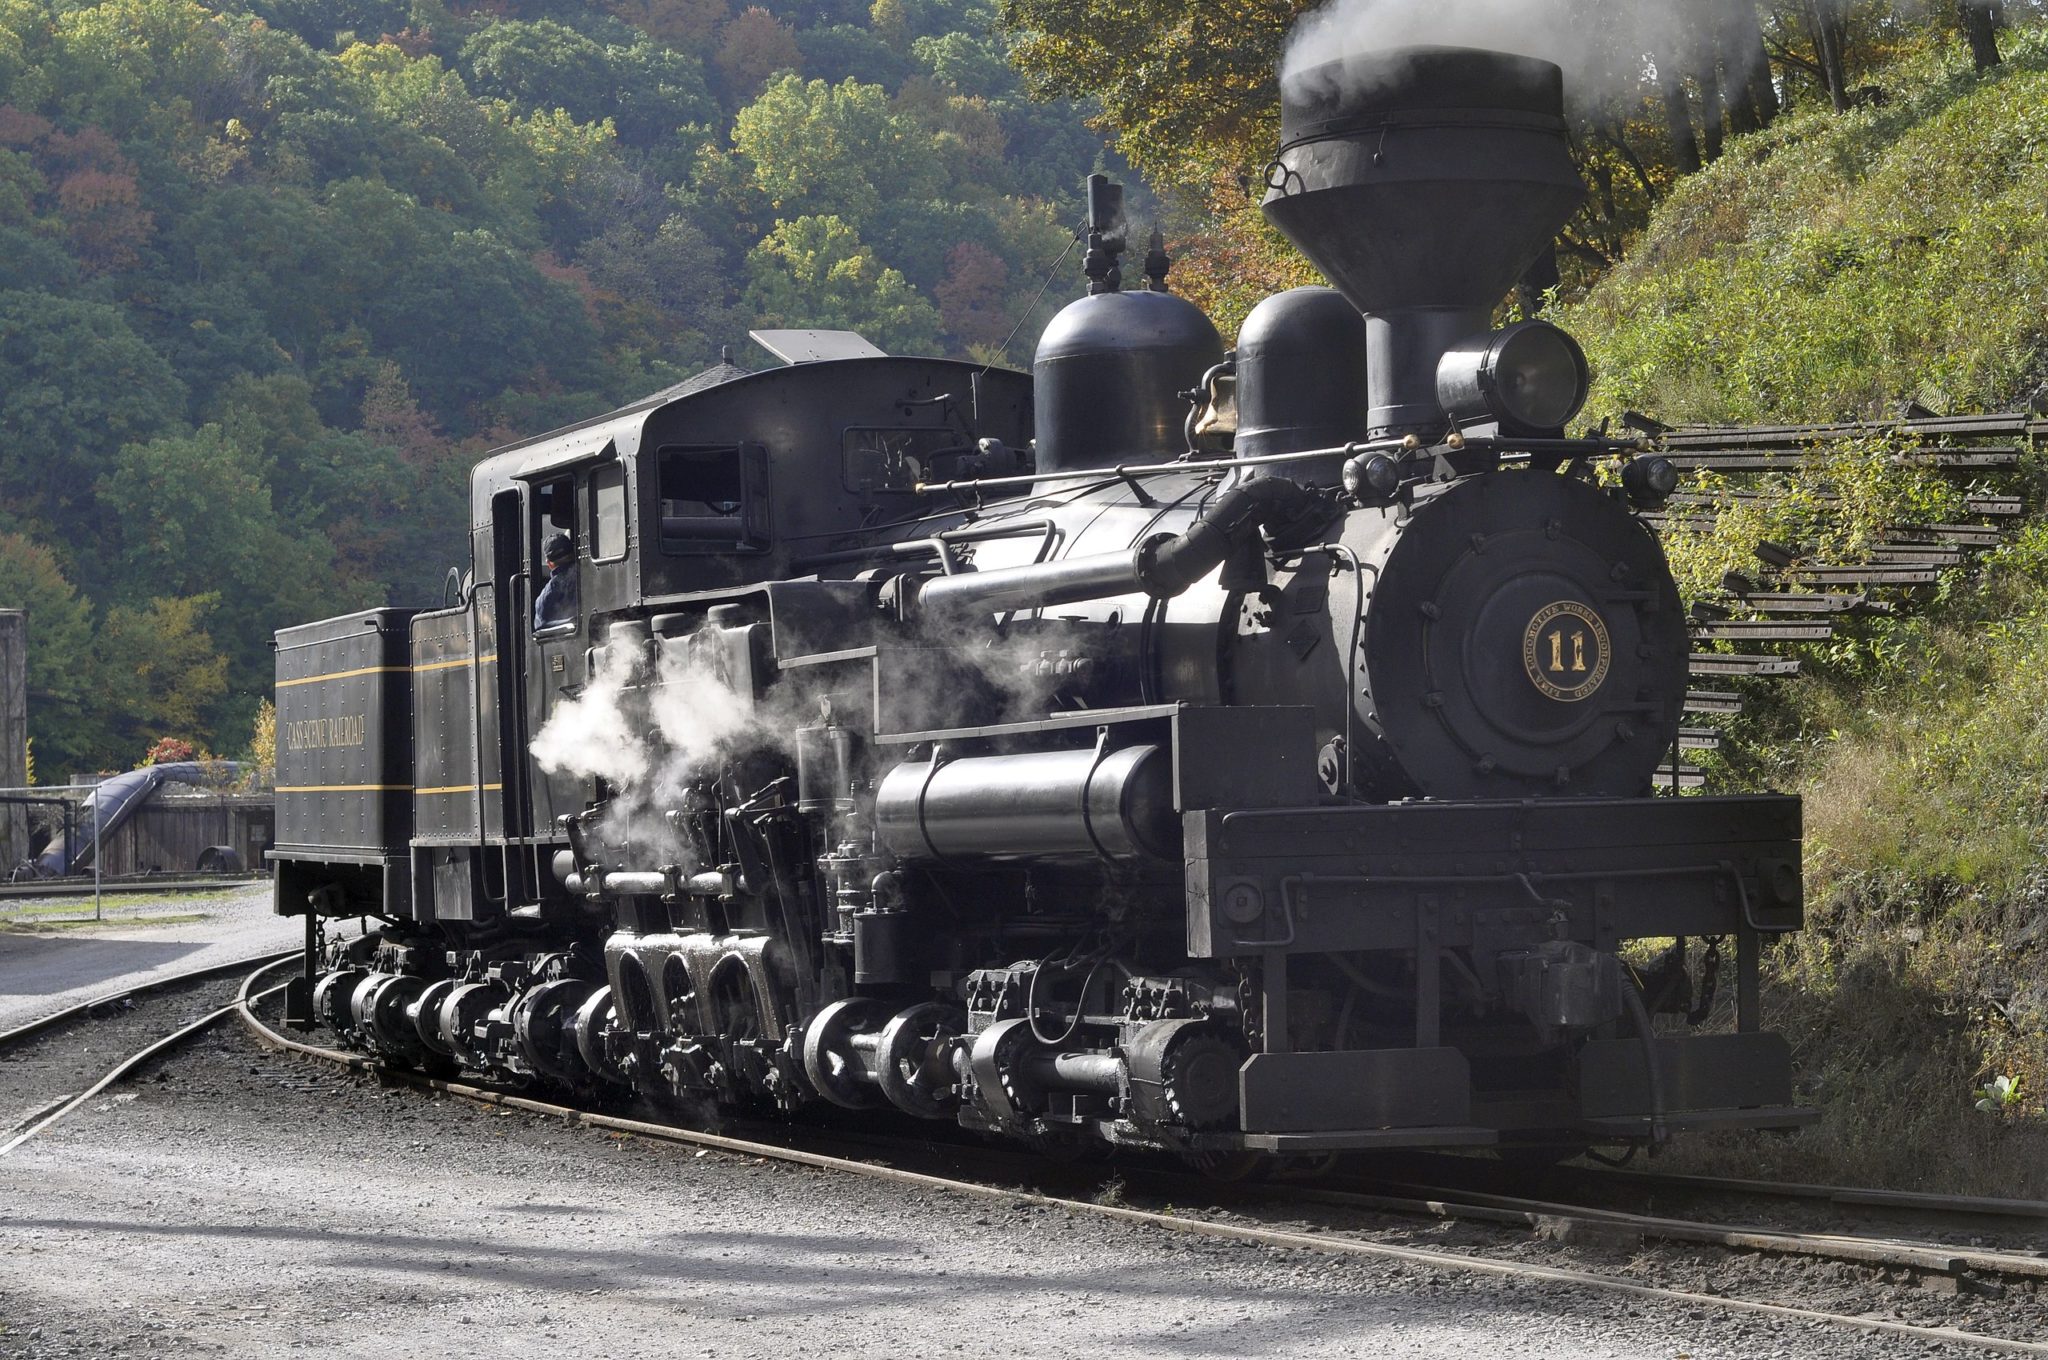 21 Cabins Near Cass Scenic Railroad: With Hot Tubs & Jacuzzi Tubs